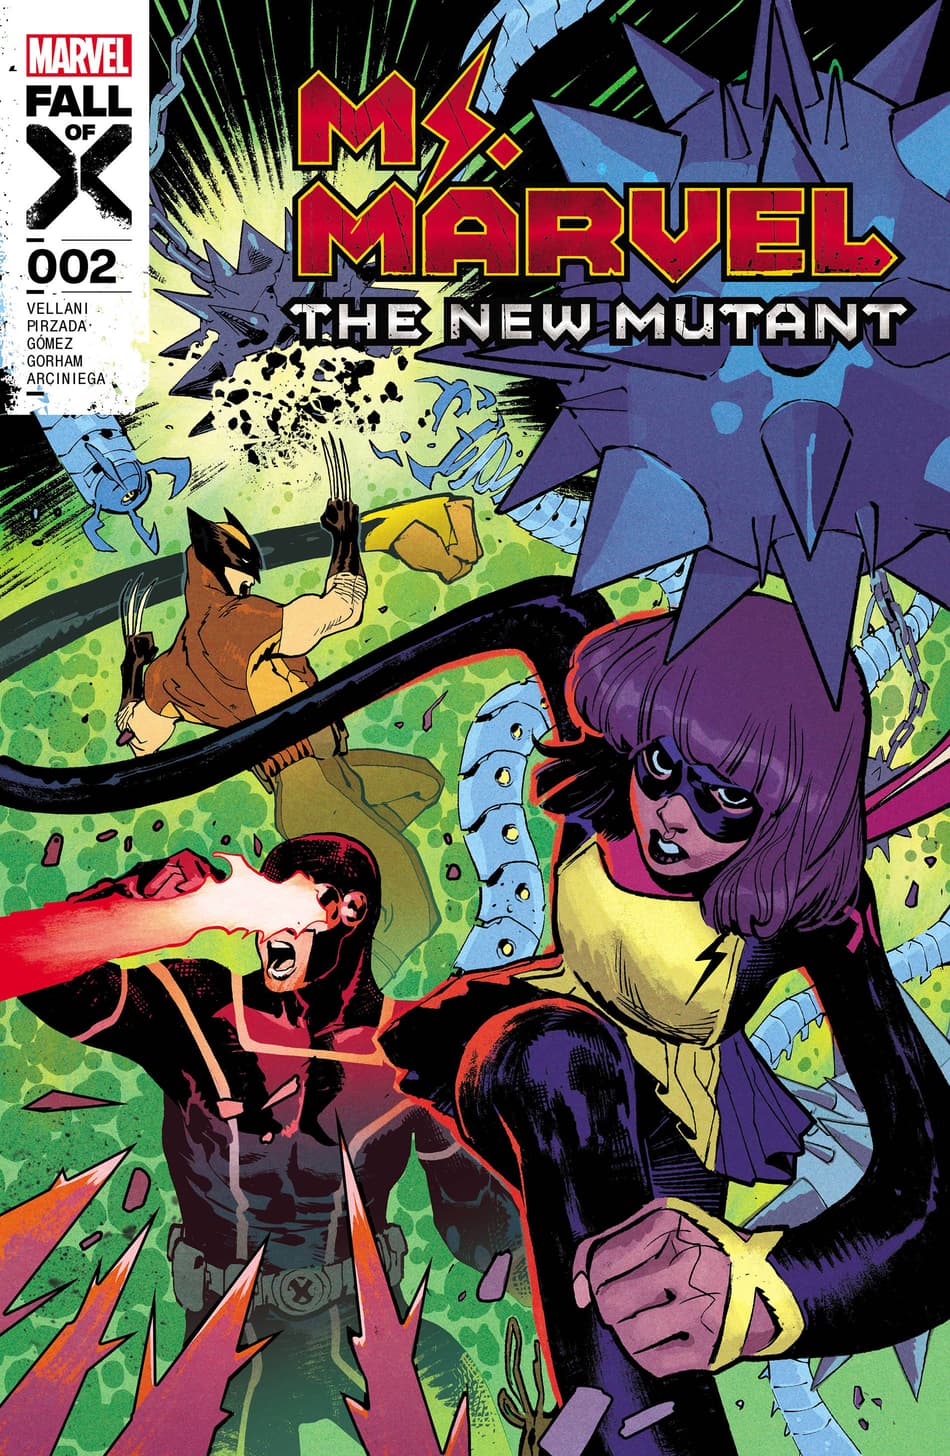 Cover to MS. MARVEL: THE NEW MUTANT #2 by Sara Pichelli.